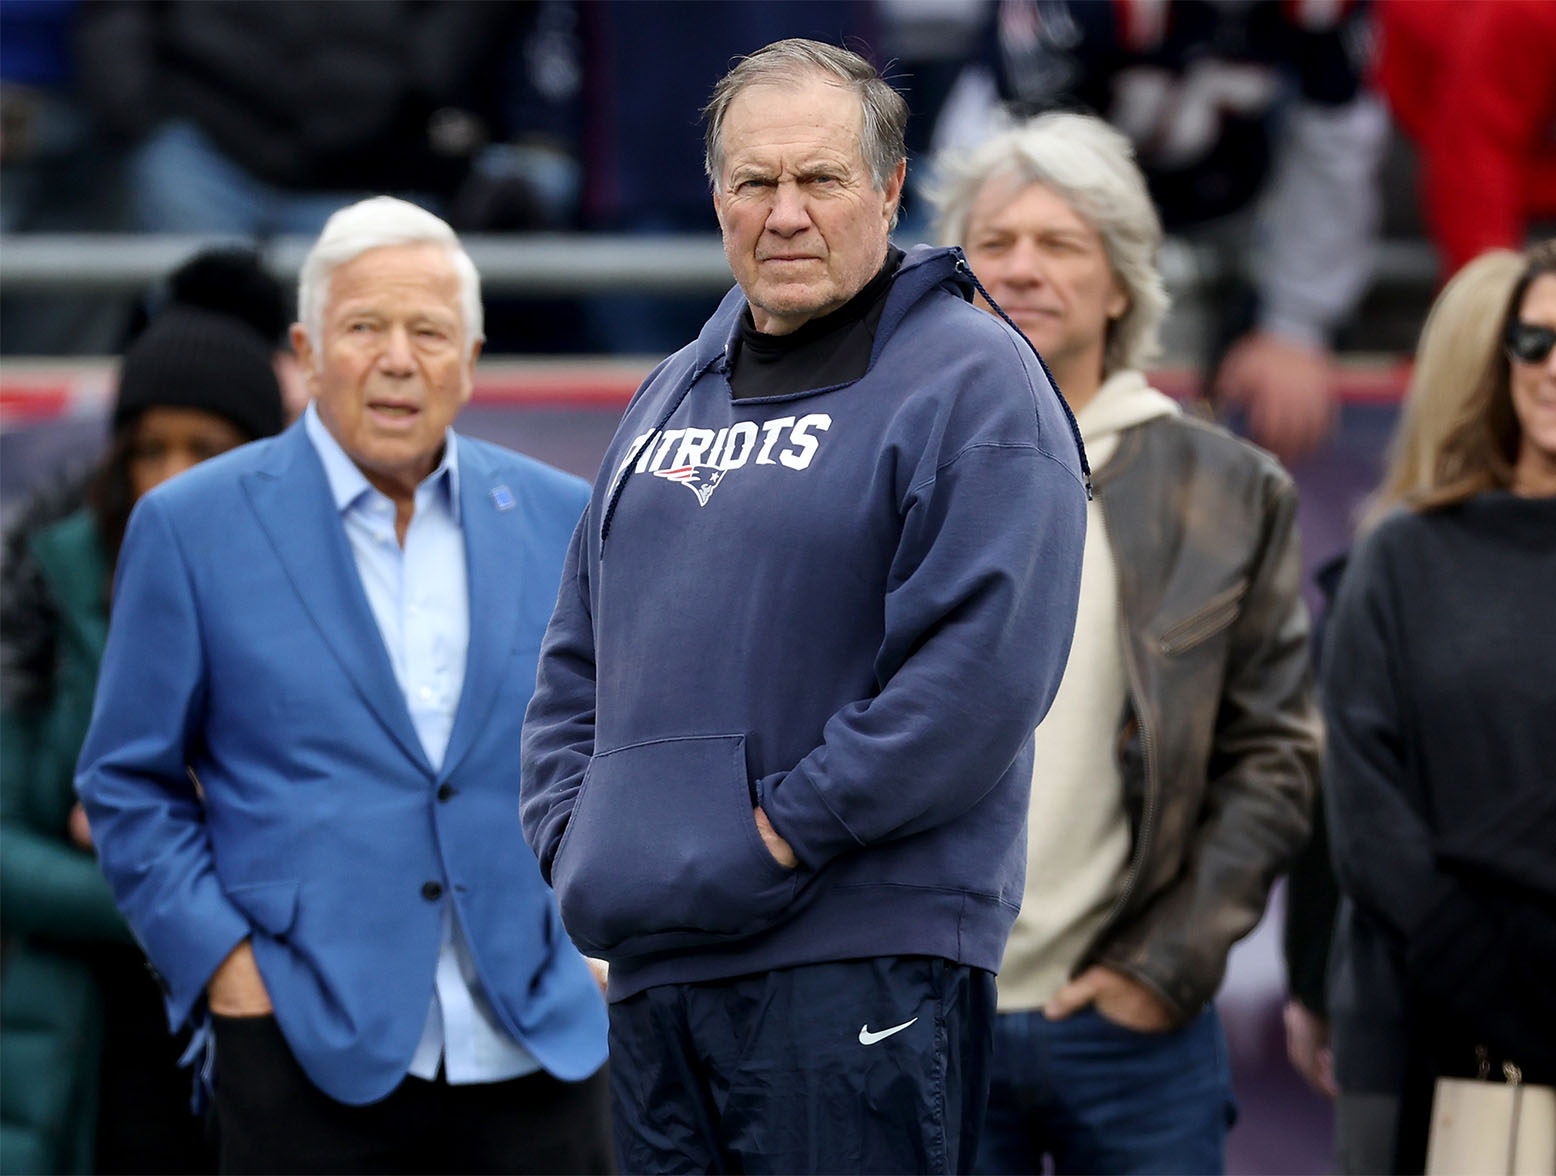 FOXBOROUGH, MASSACHUSETTS - DECEMBER 17: New England Patriots owner Robert Kraft and head coach Bill Belichick of the New England Patriots look on prior to a game against the Kansas City Chiefs at Gillette Stadium on December 17, 2023 in Foxborough, Massachusetts. (Photo by Maddie Meyer/Getty Images)